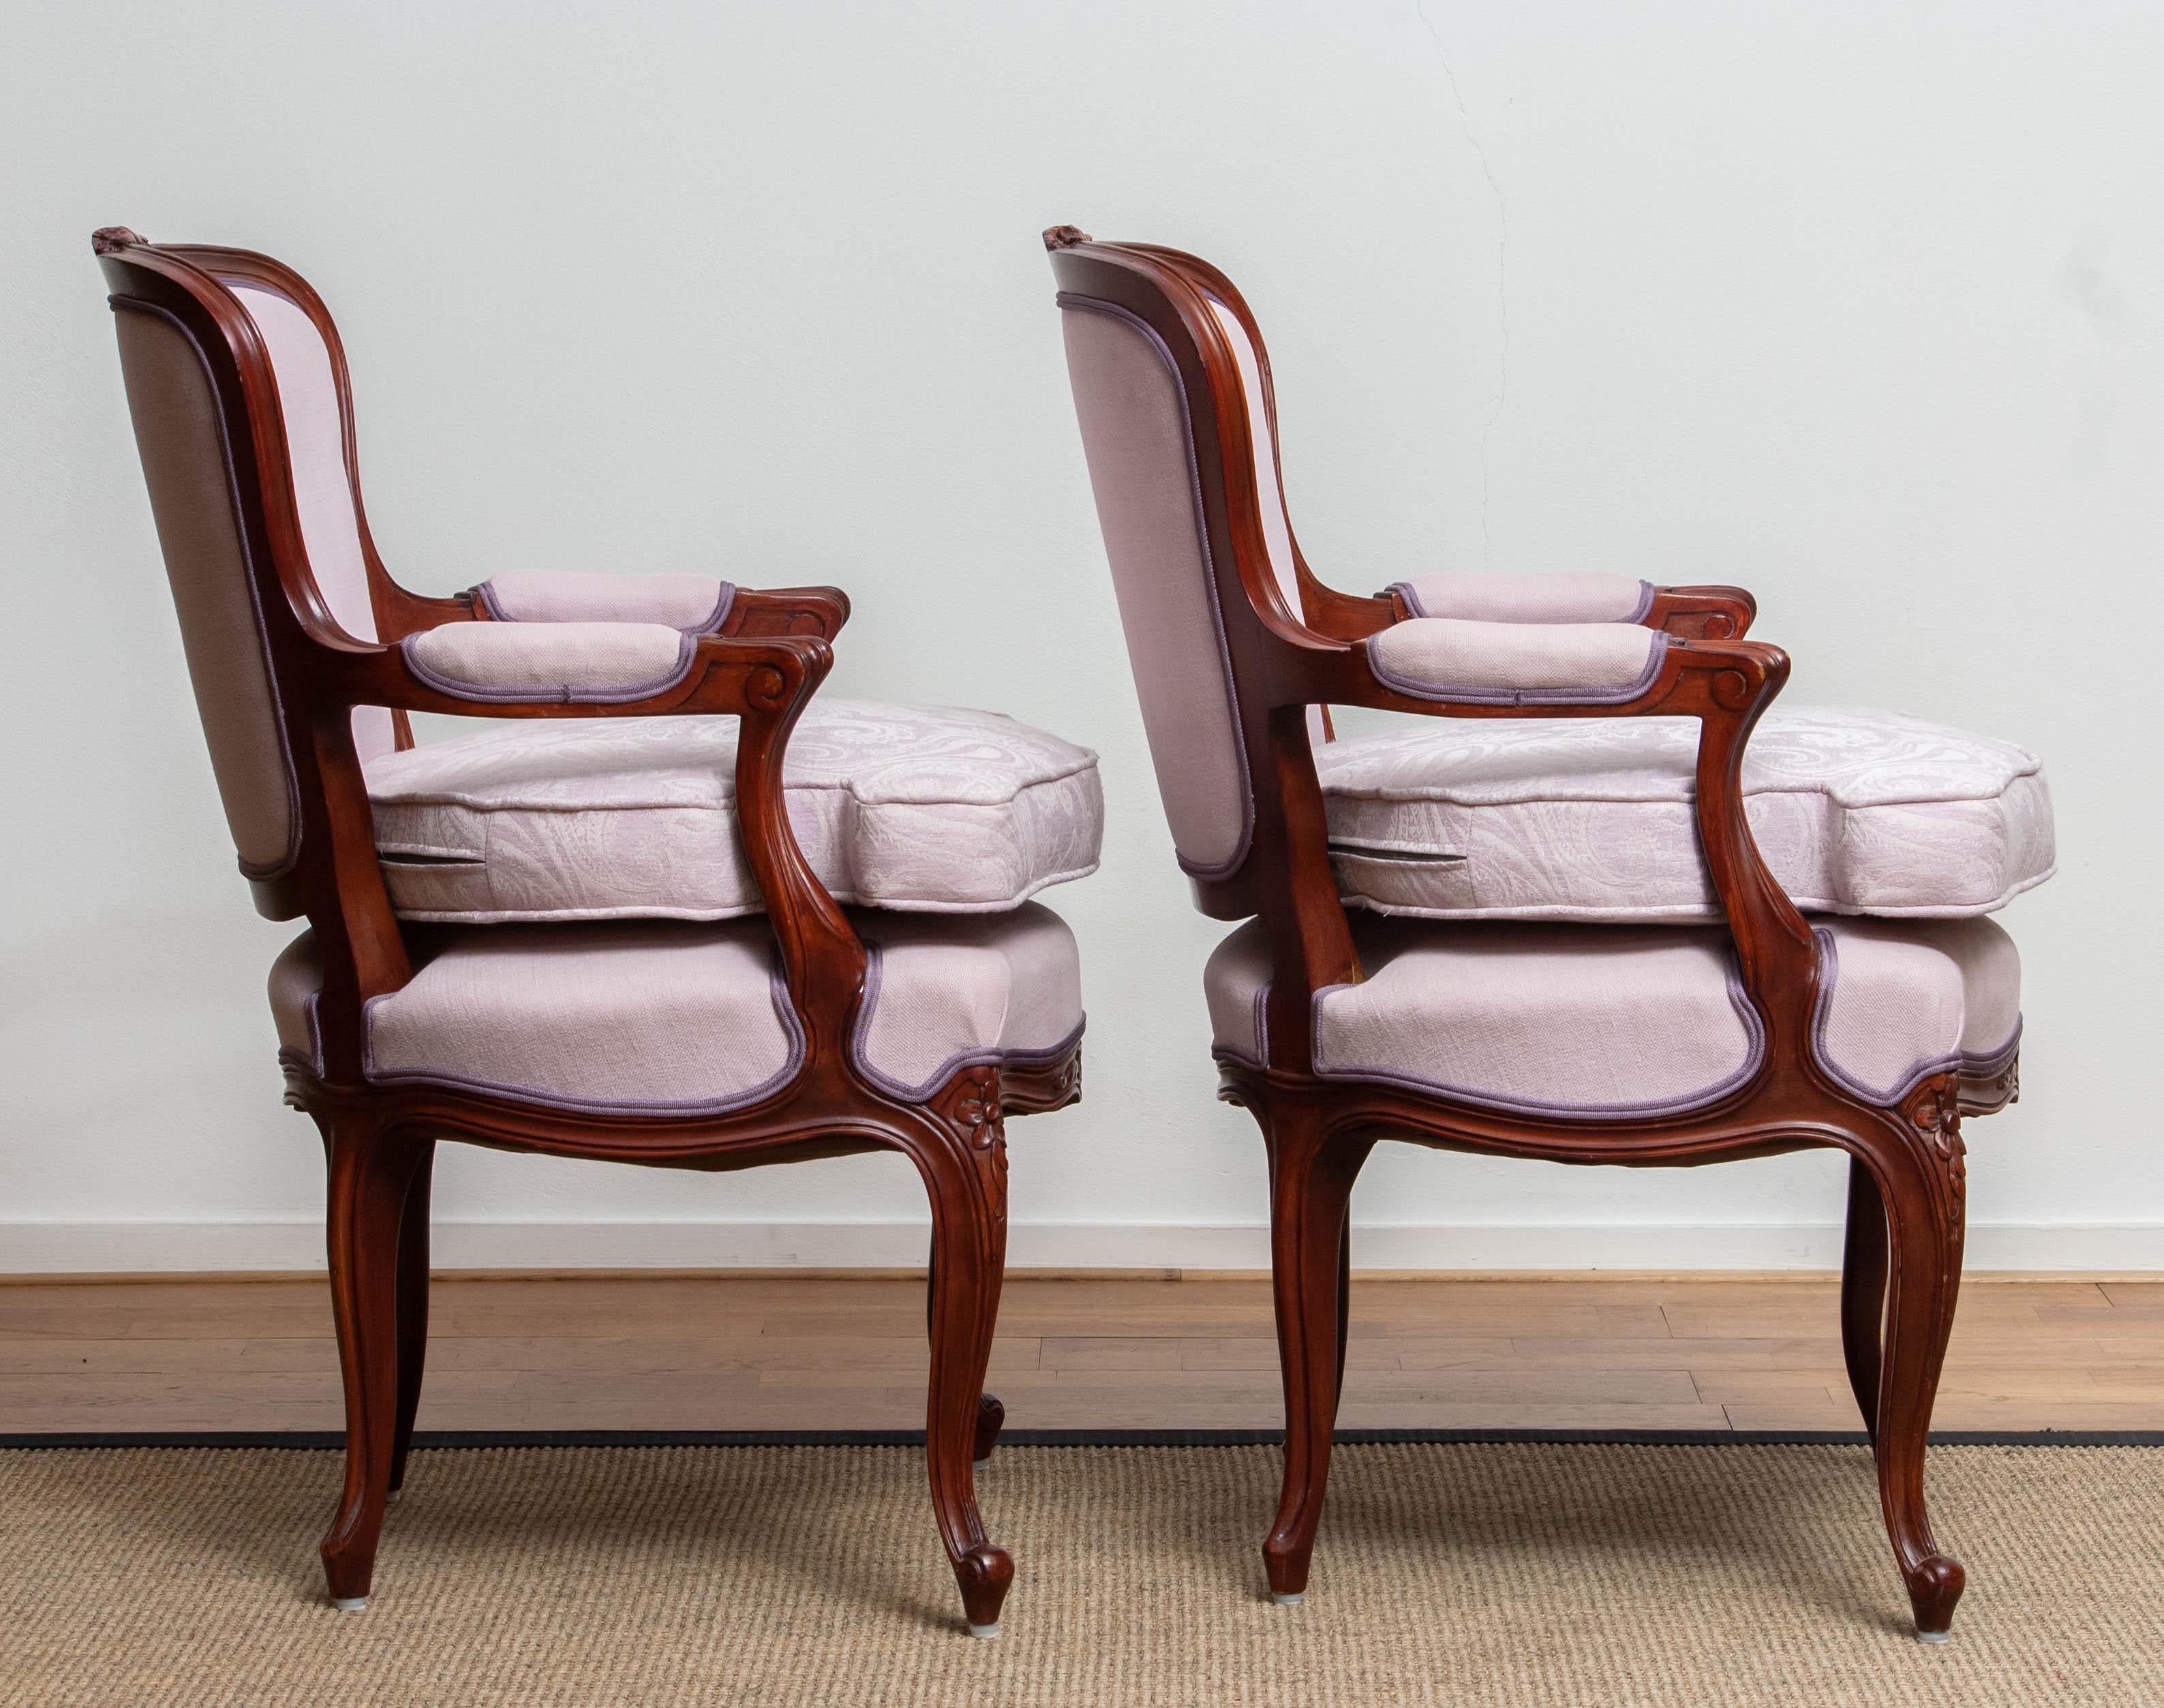 1950 Pair of Pink Swedish Rococo Bergères in the Shabby Chic Technique Chairs F 1